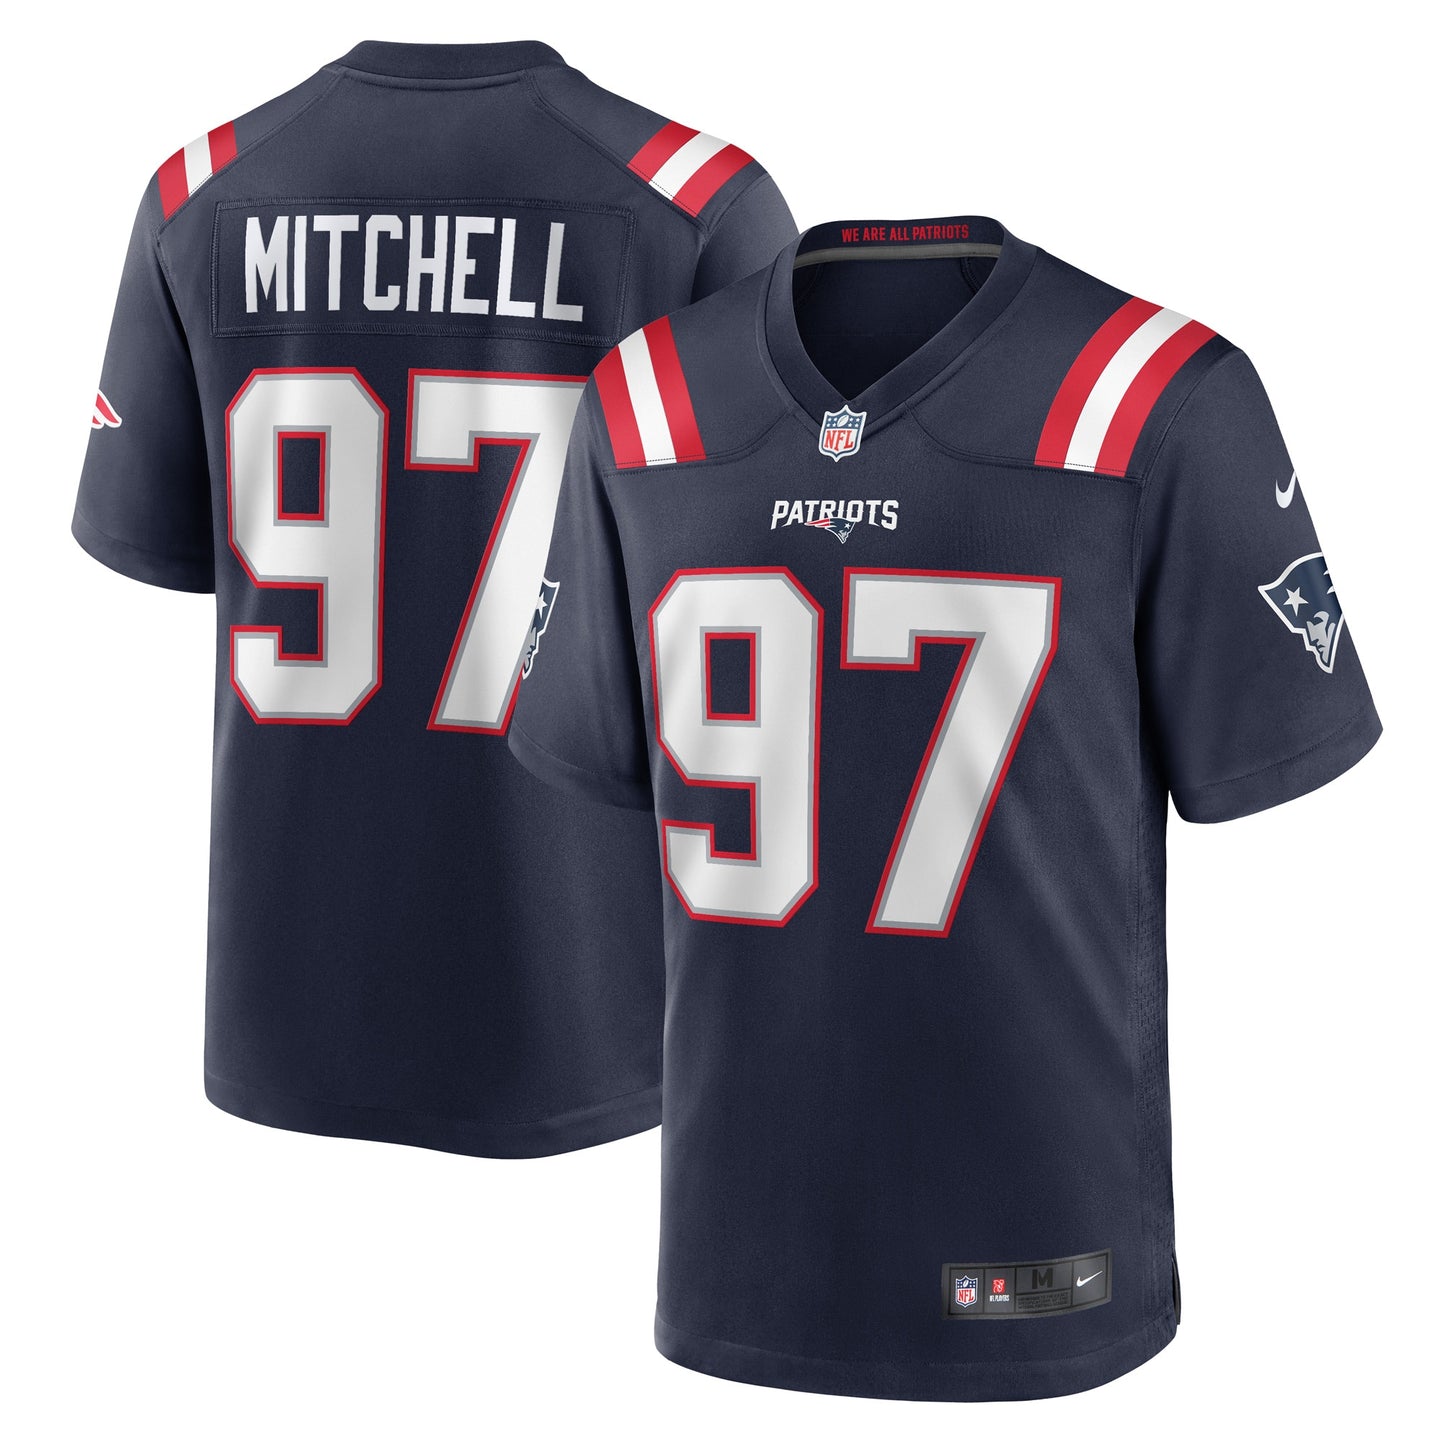 DaMarcus Mitchell New England Patriots Nike Game Player Jersey - Navy